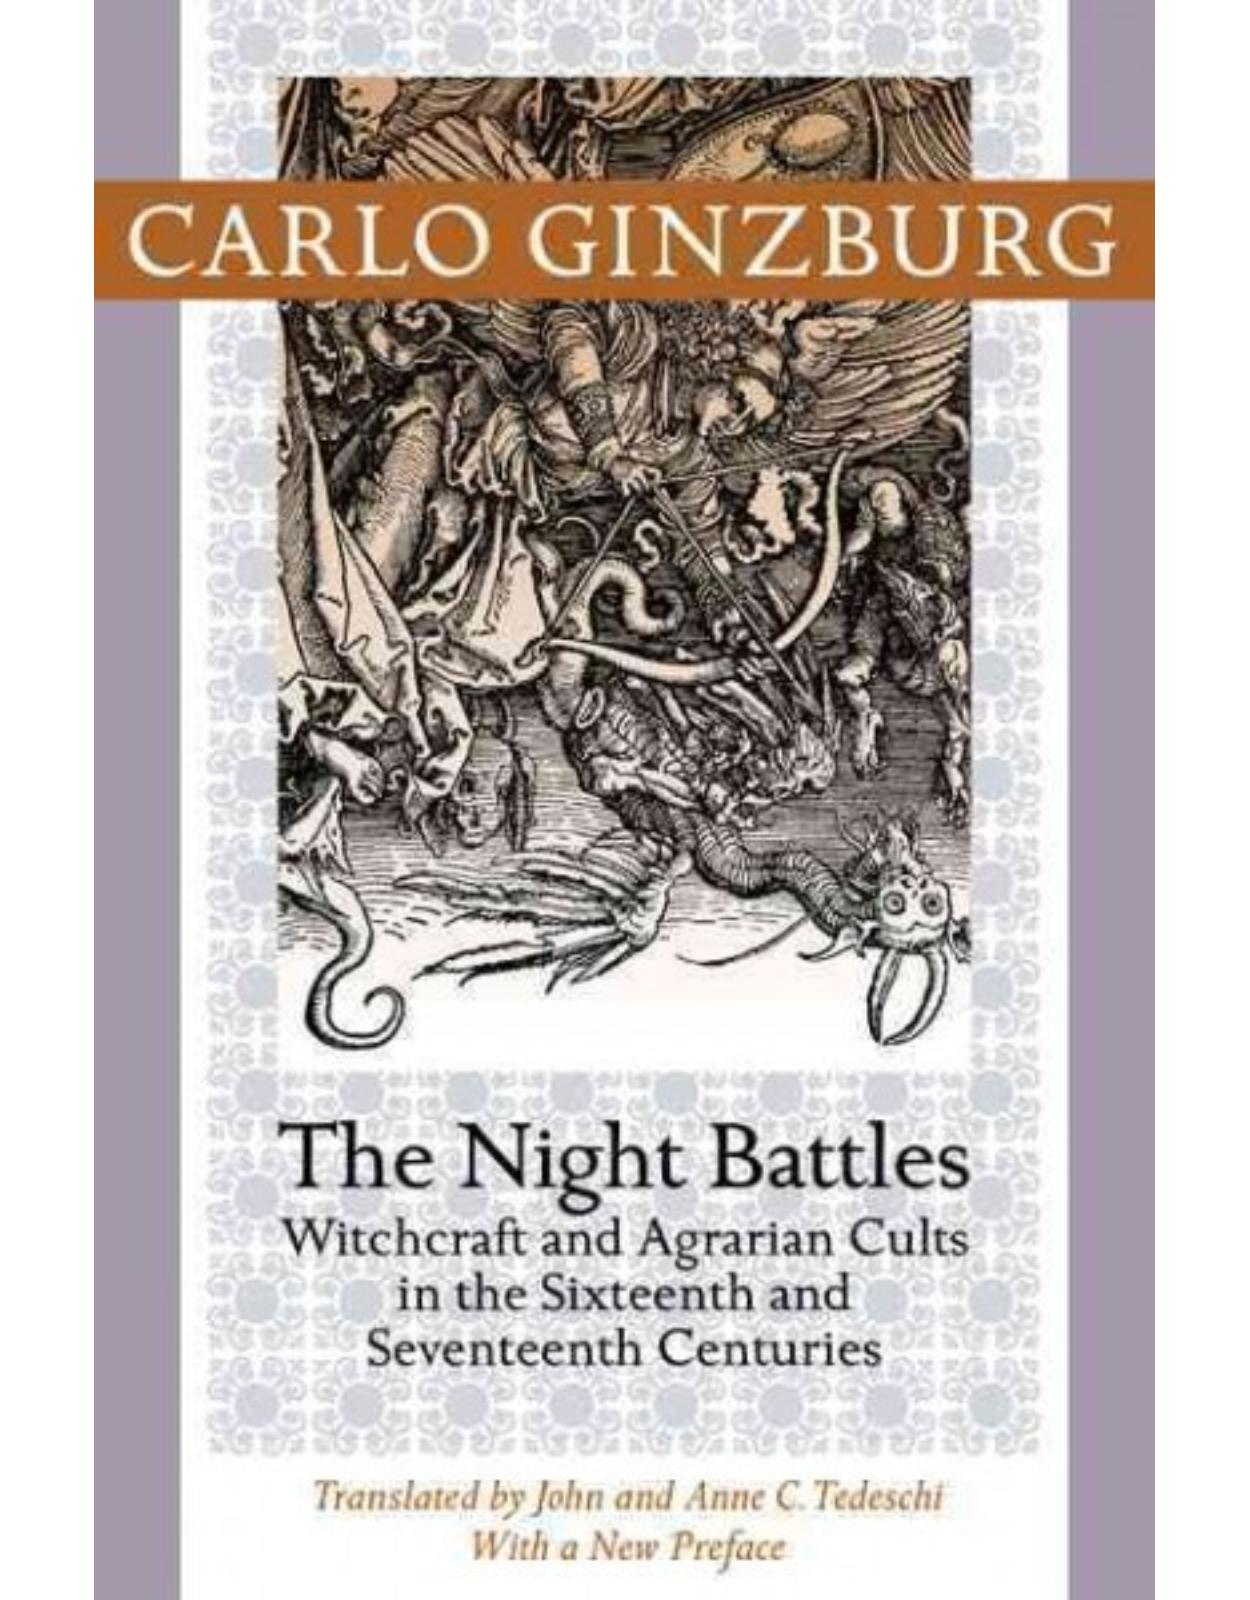 Night Battles. Witchcraft and Agrarian Cults in the Sixteenth and Seventeenth Centuries